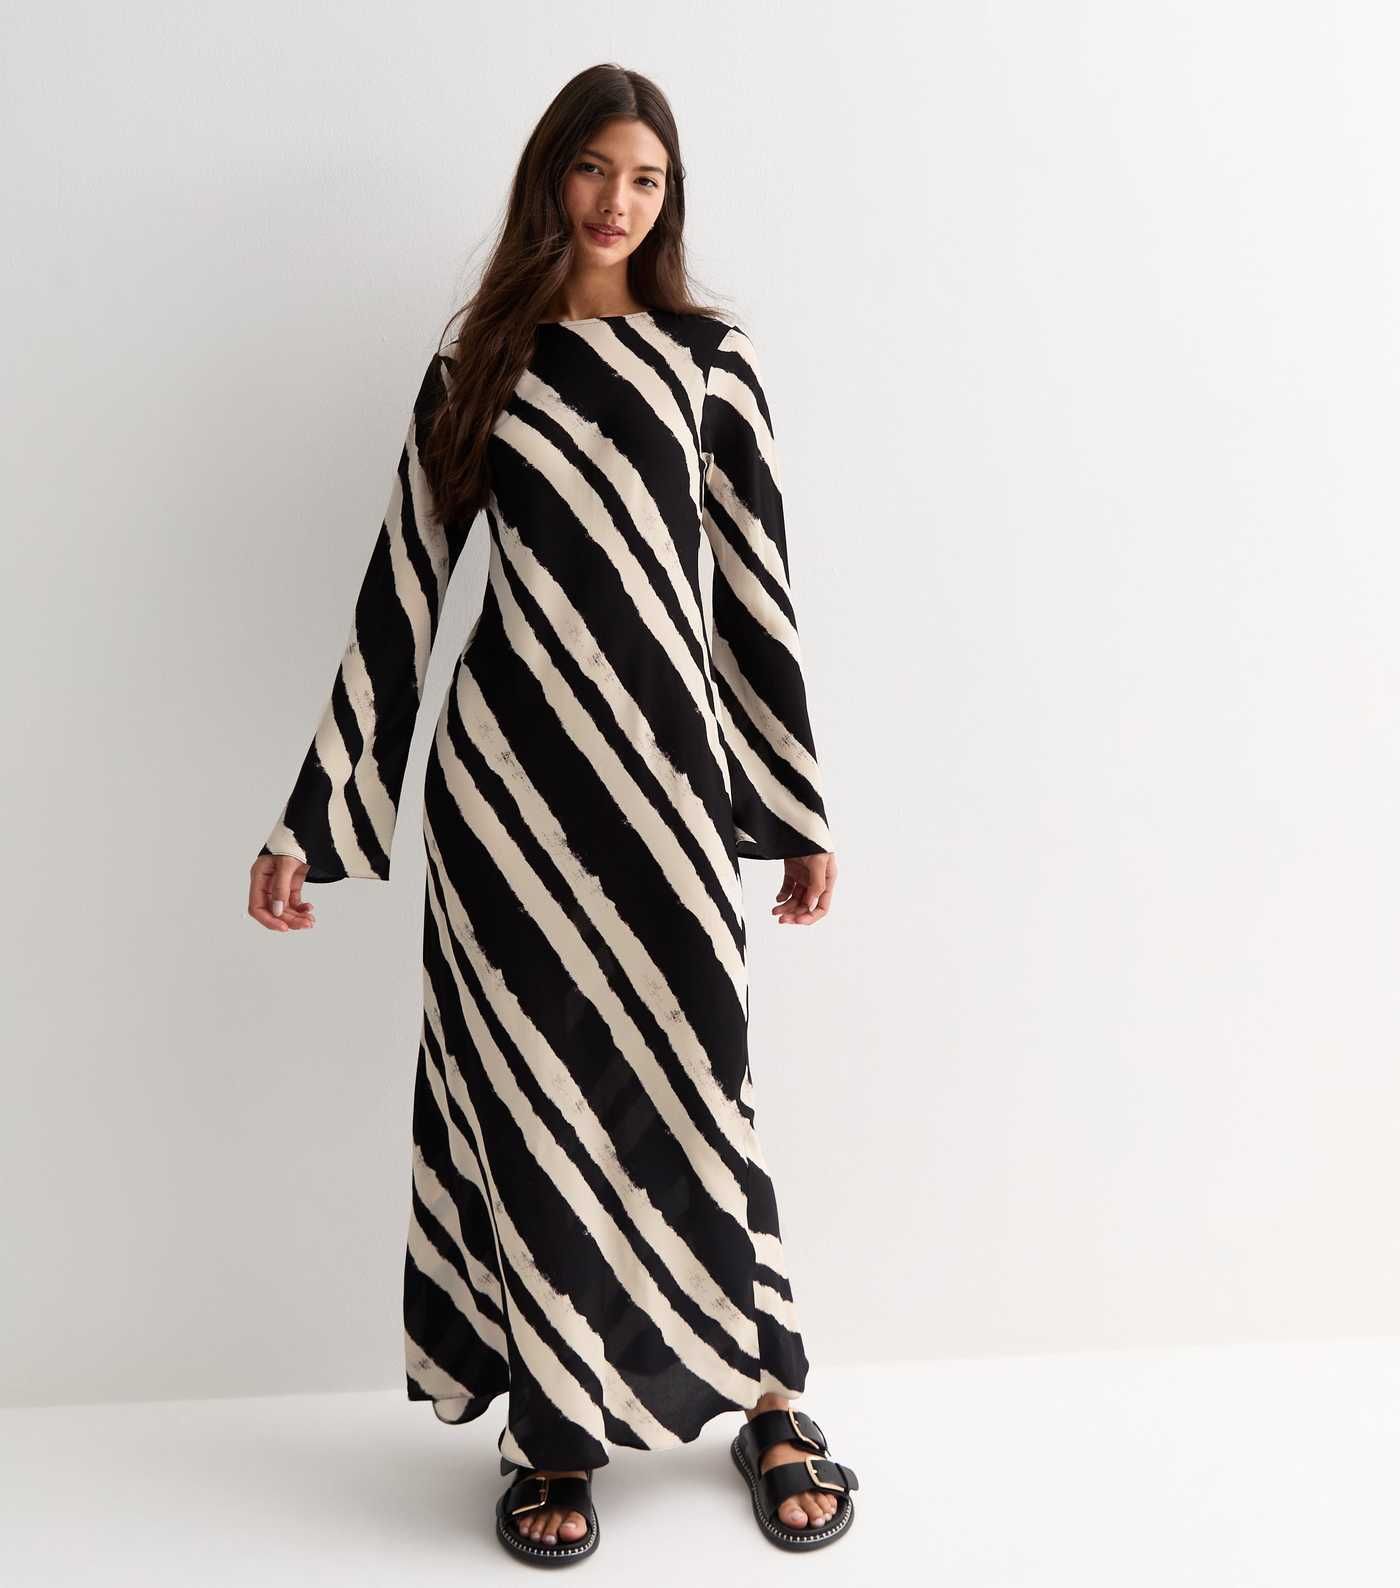 Black Diagonal Stripe Maxi Dress
						
						Add to Saved Items
						Remove from Saved Items | New Look (UK)